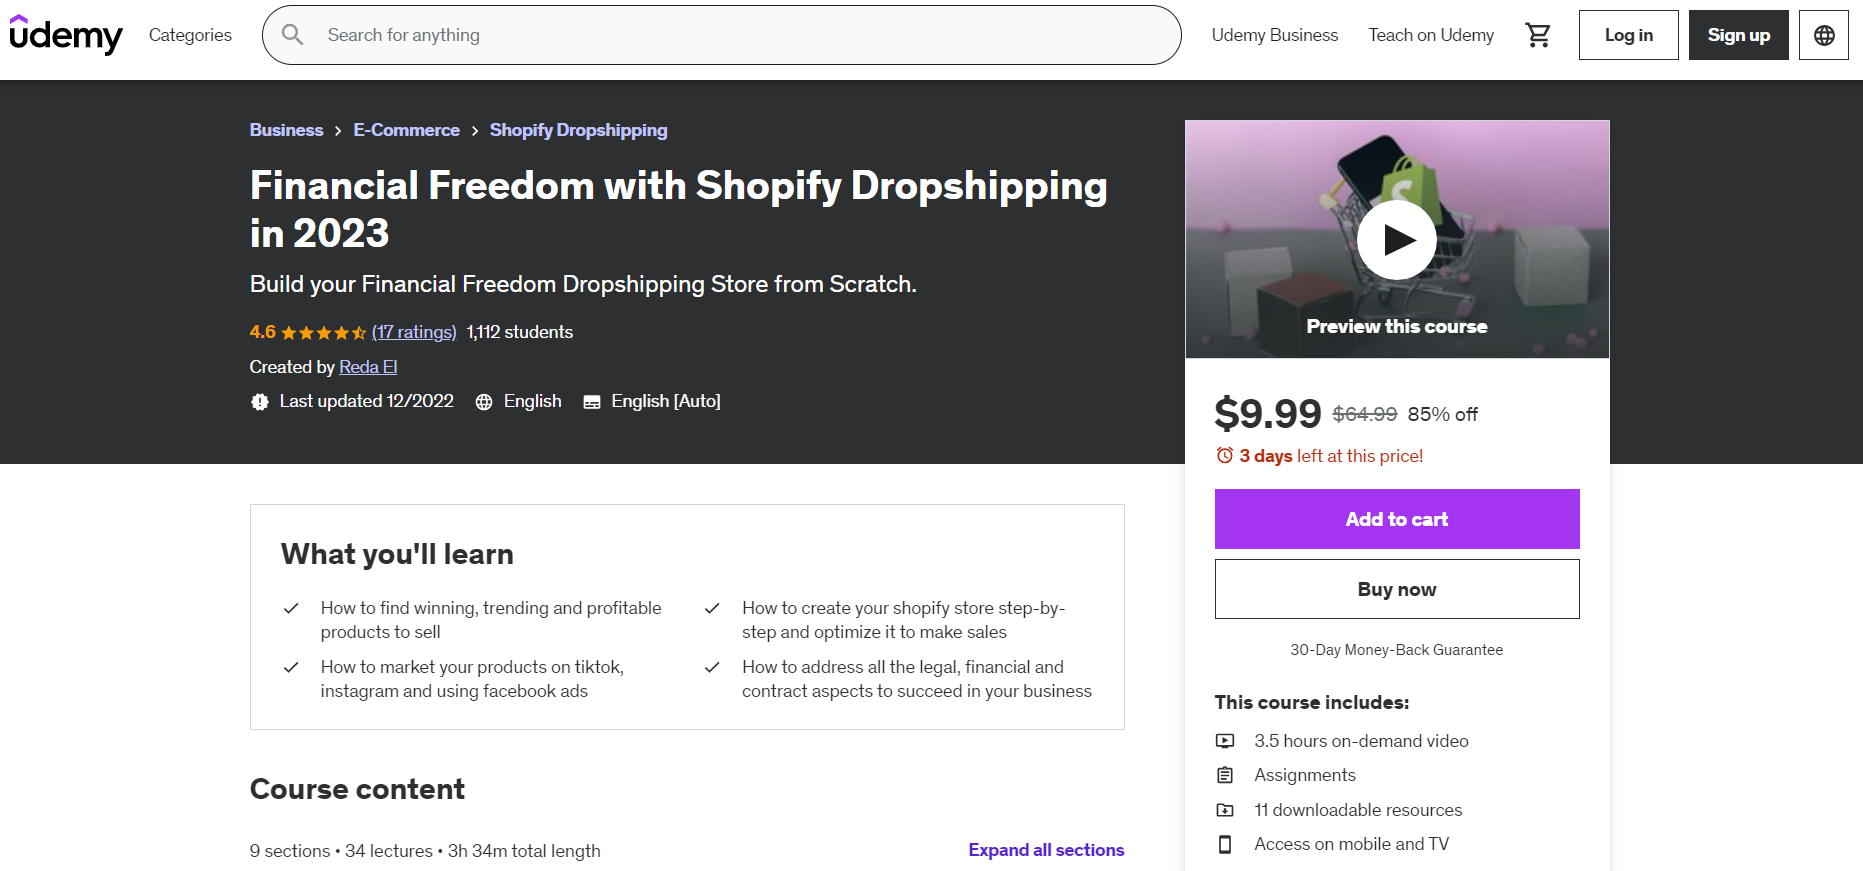 Financial Freedom With Shopify Dropshipping In 2023